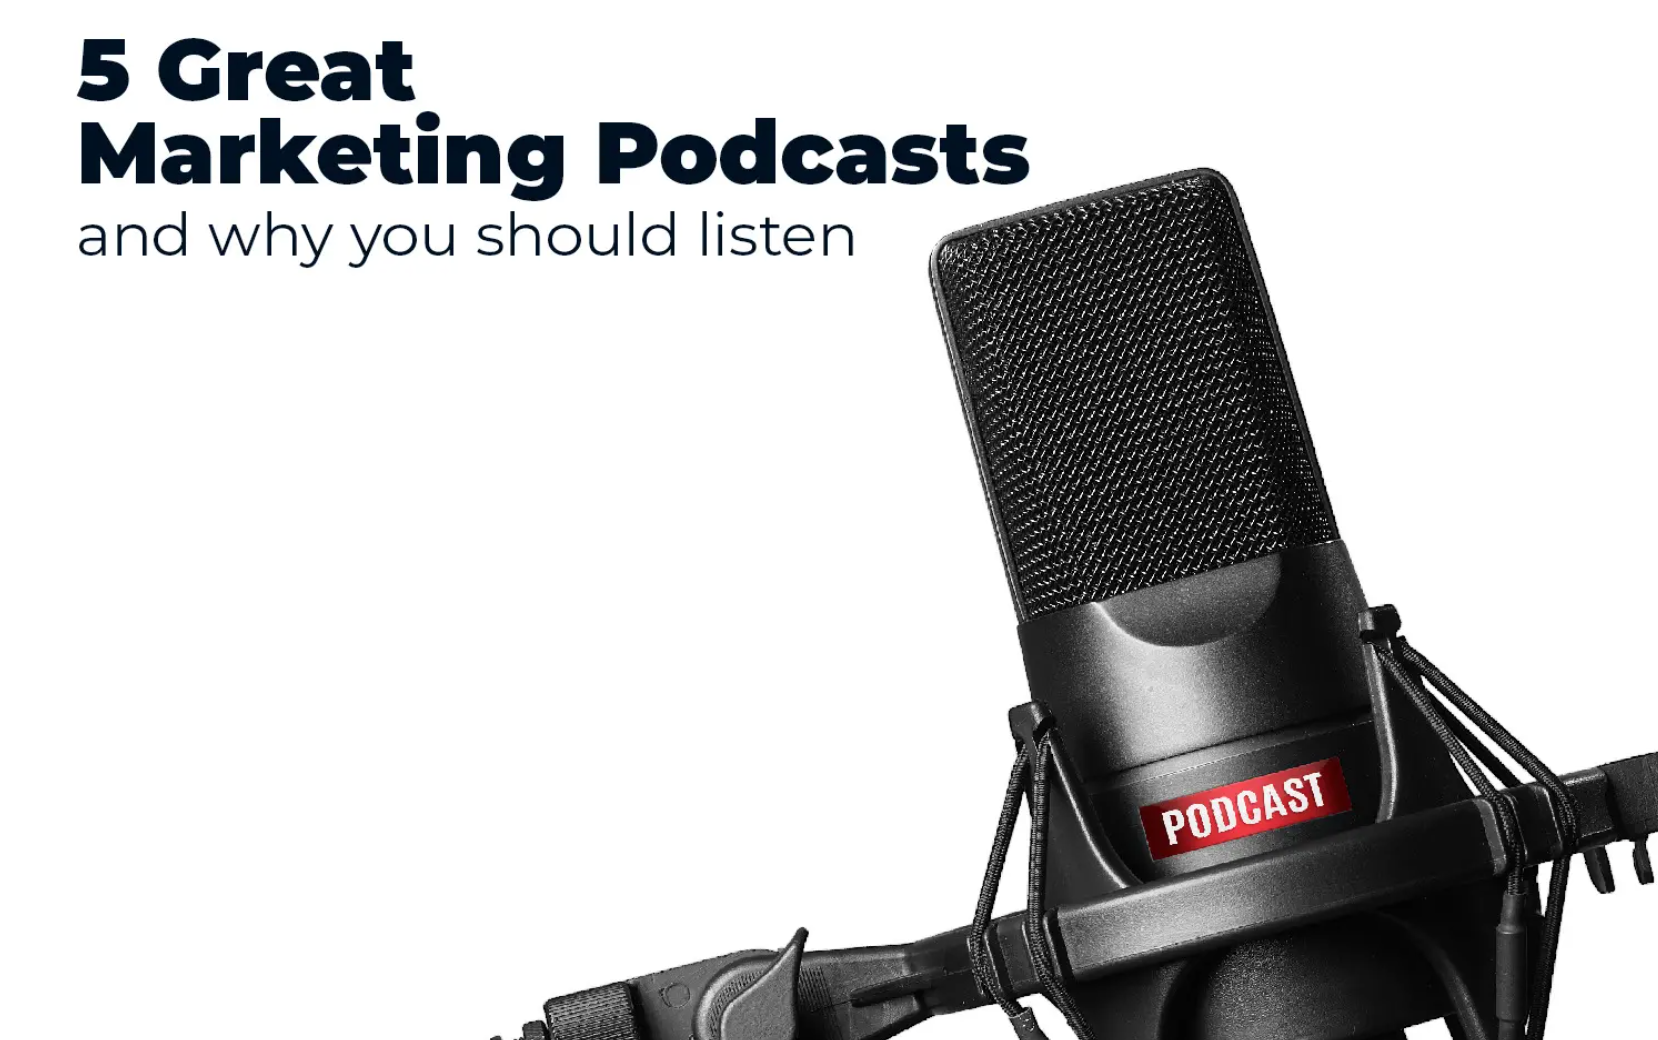 Five Great Marketing Podcasts